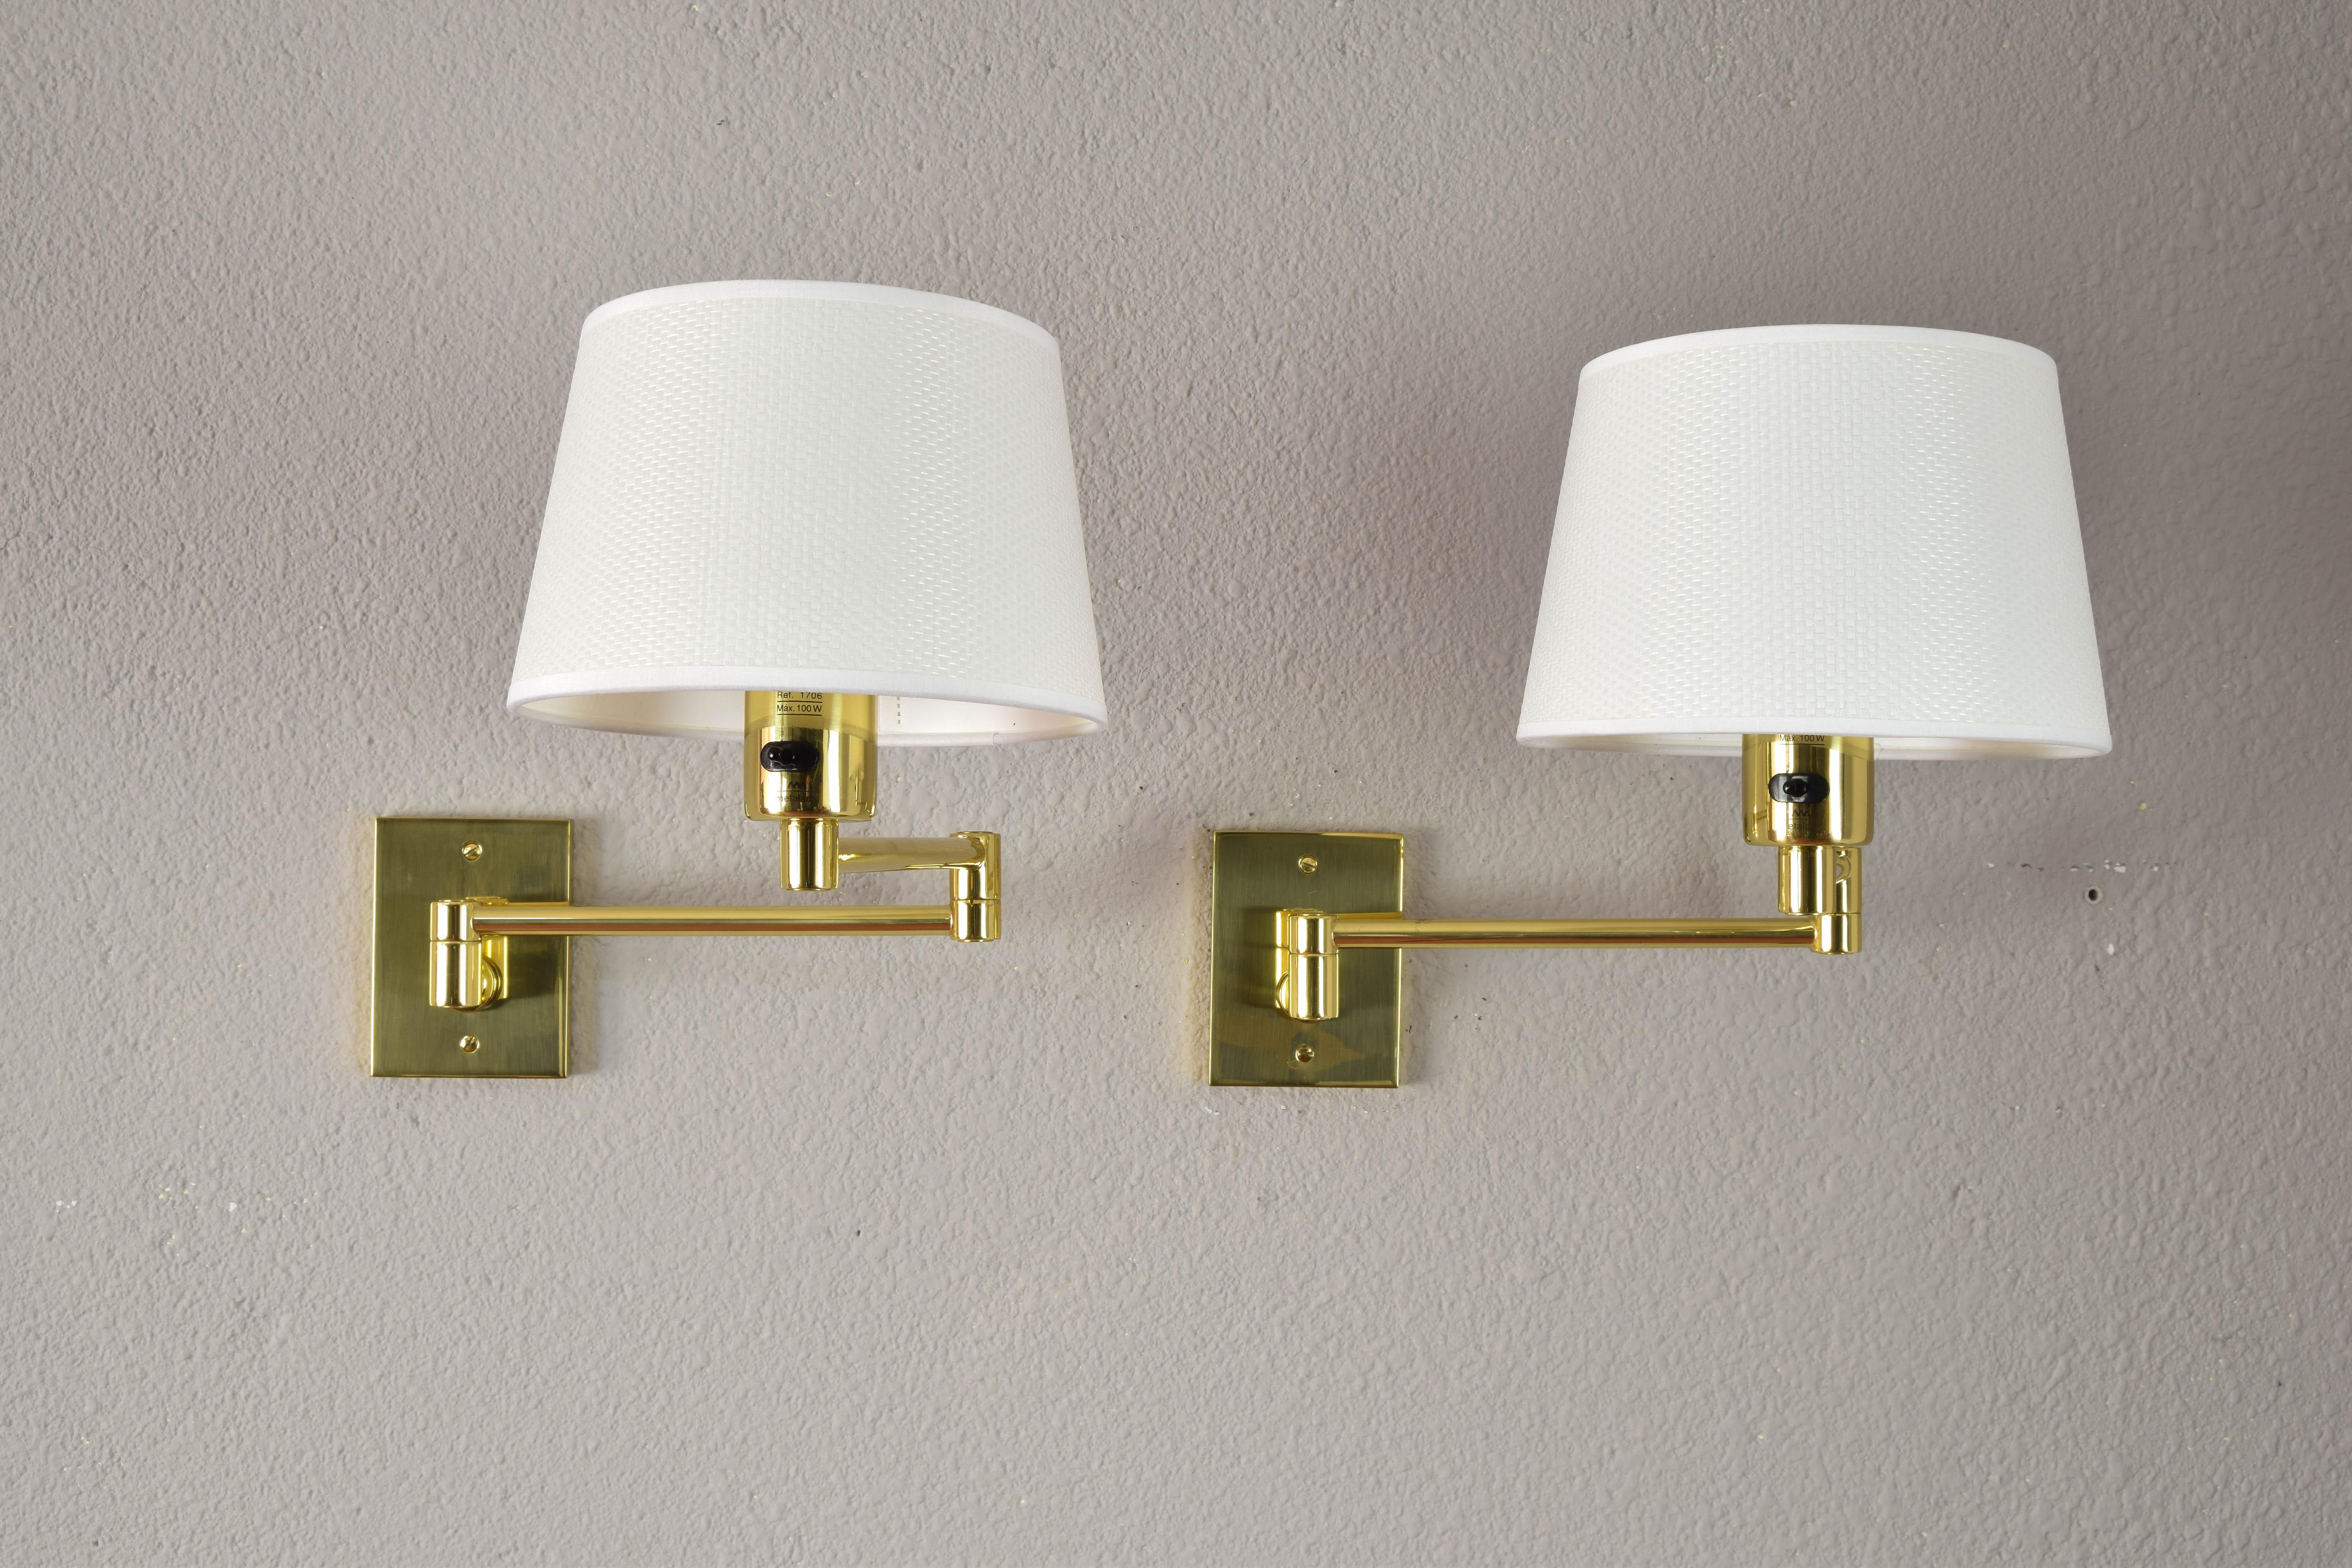 Pair of wall lamps designed by George W. Hansen in the 1960s and produced by the Spanish firm Metalarte with permission from Hansen Lamps New York in the 1970s. Brass structure and articulated arm.
Structures in proper operation. Brass in very good